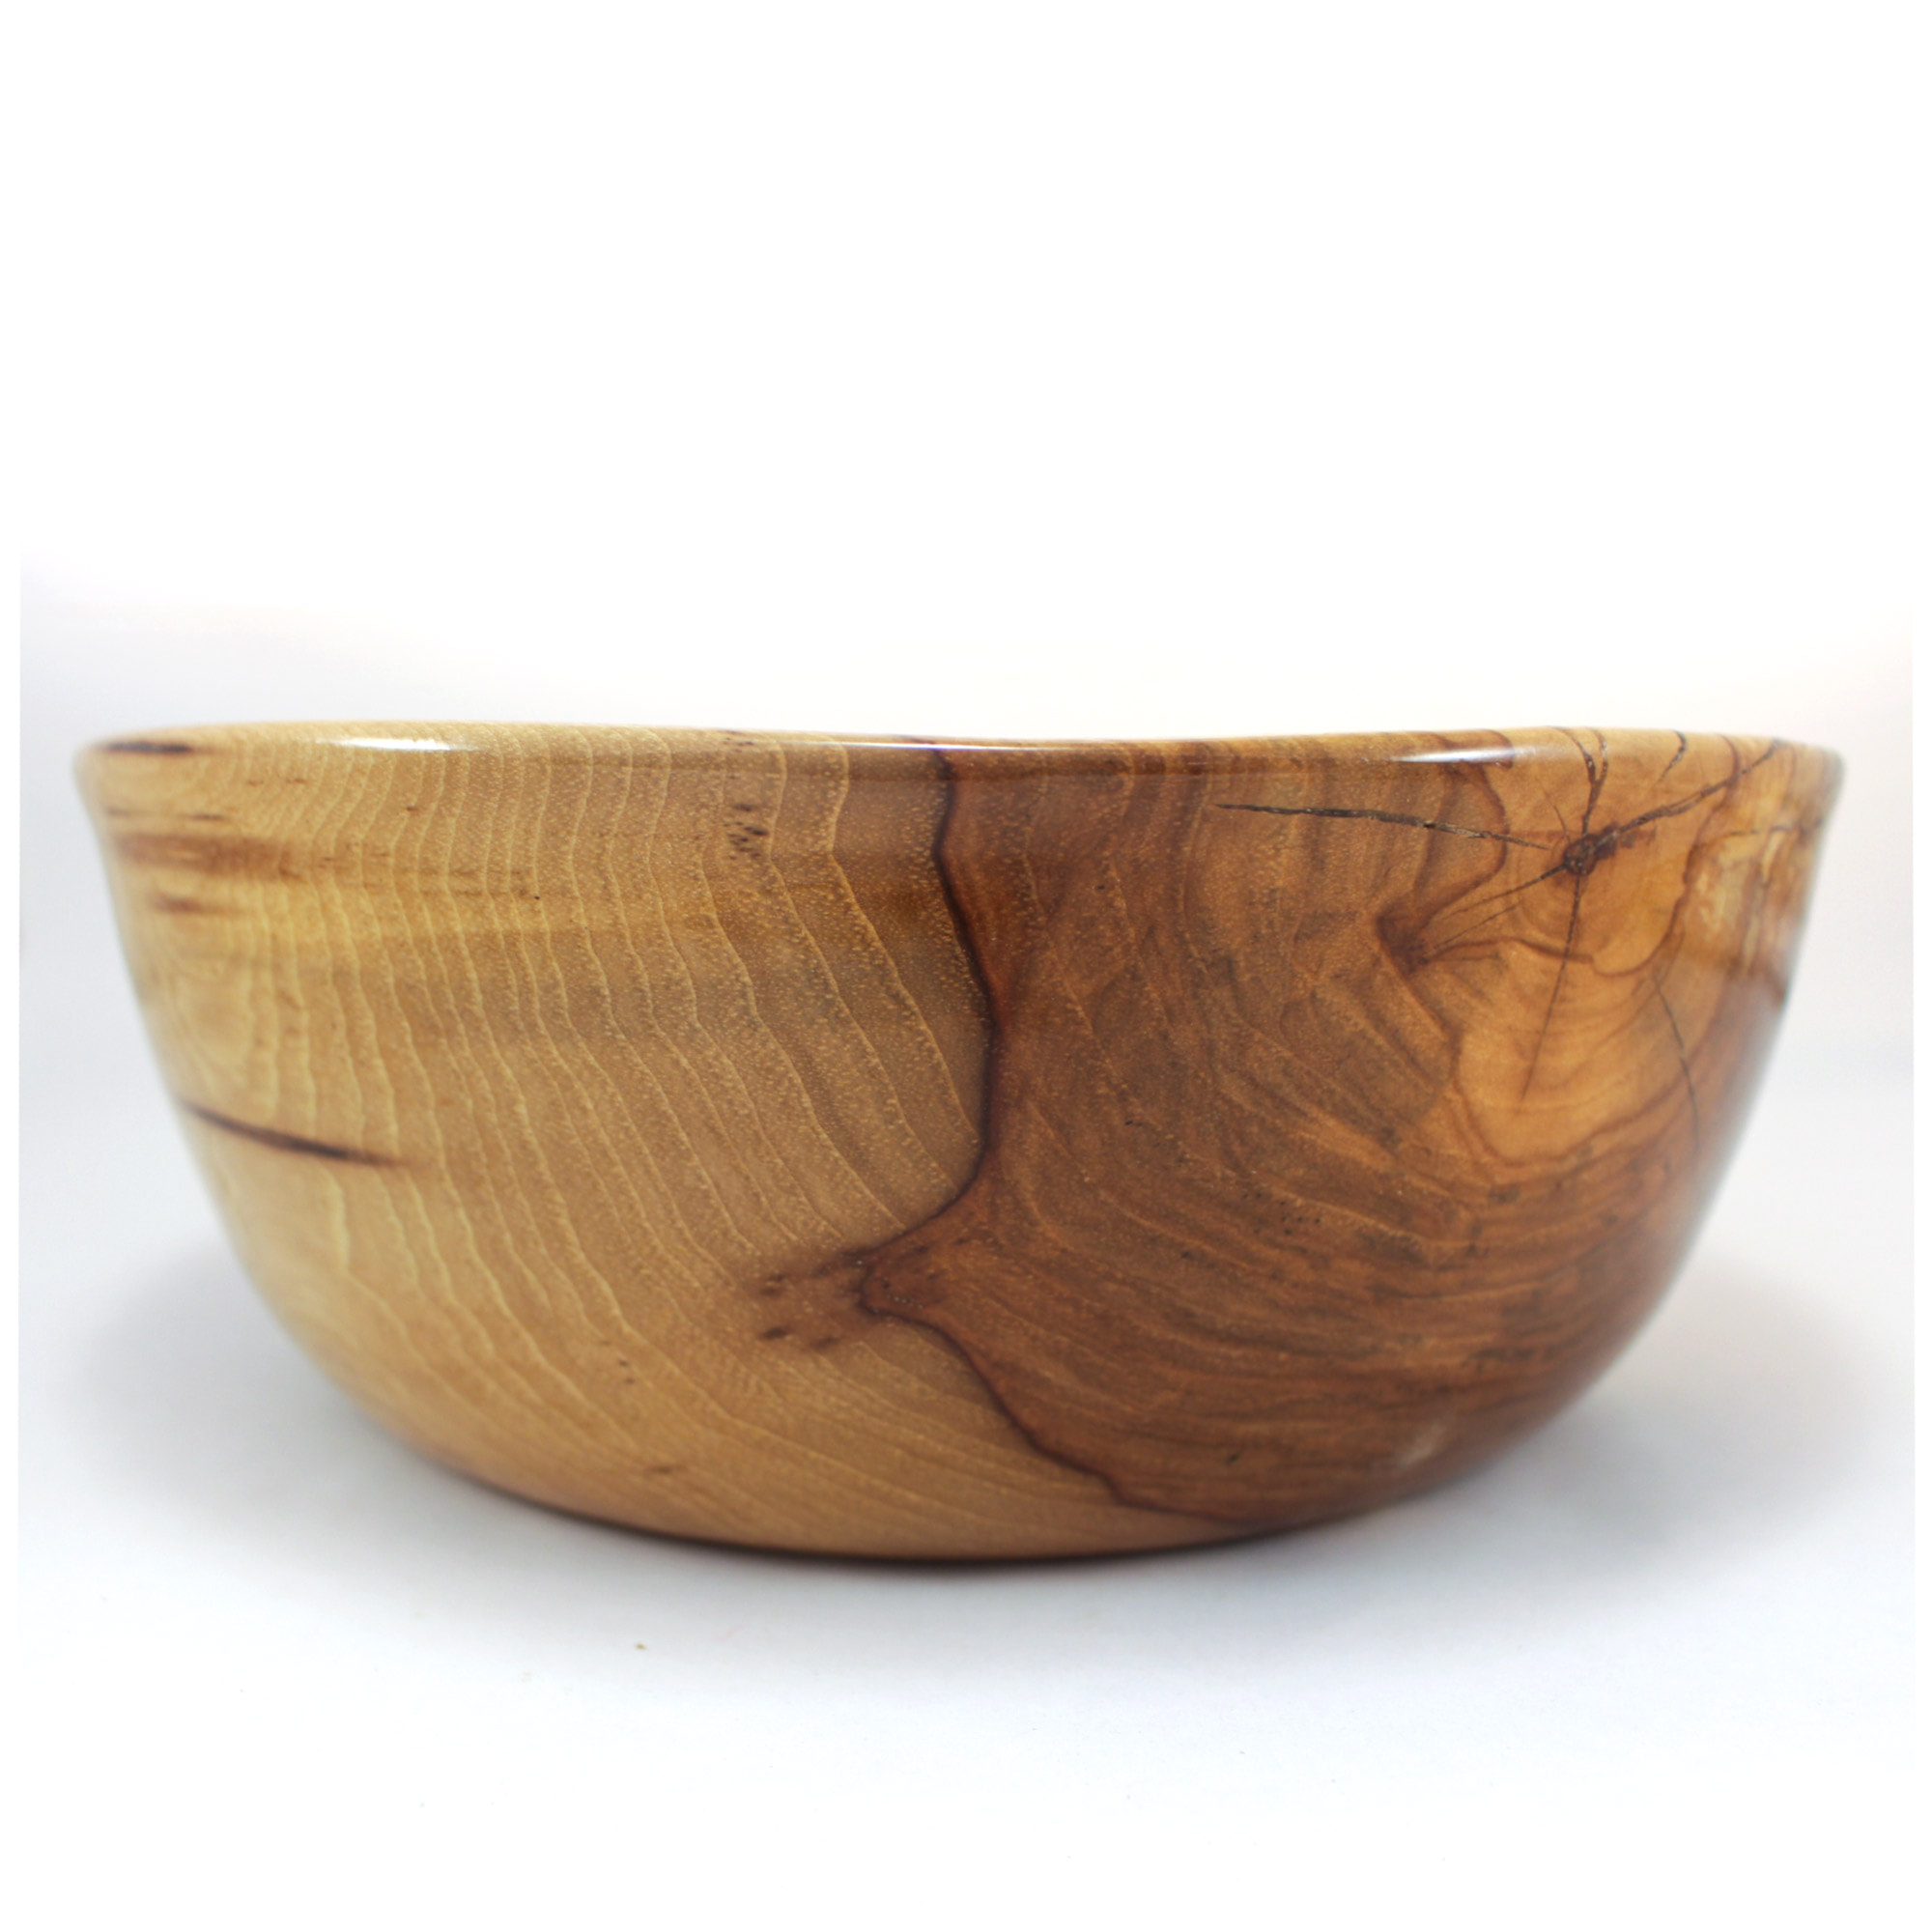 Yarn Bowl, Extra Large, Spalted-Pecan, Heirloom Knitting or Crochet Bowl